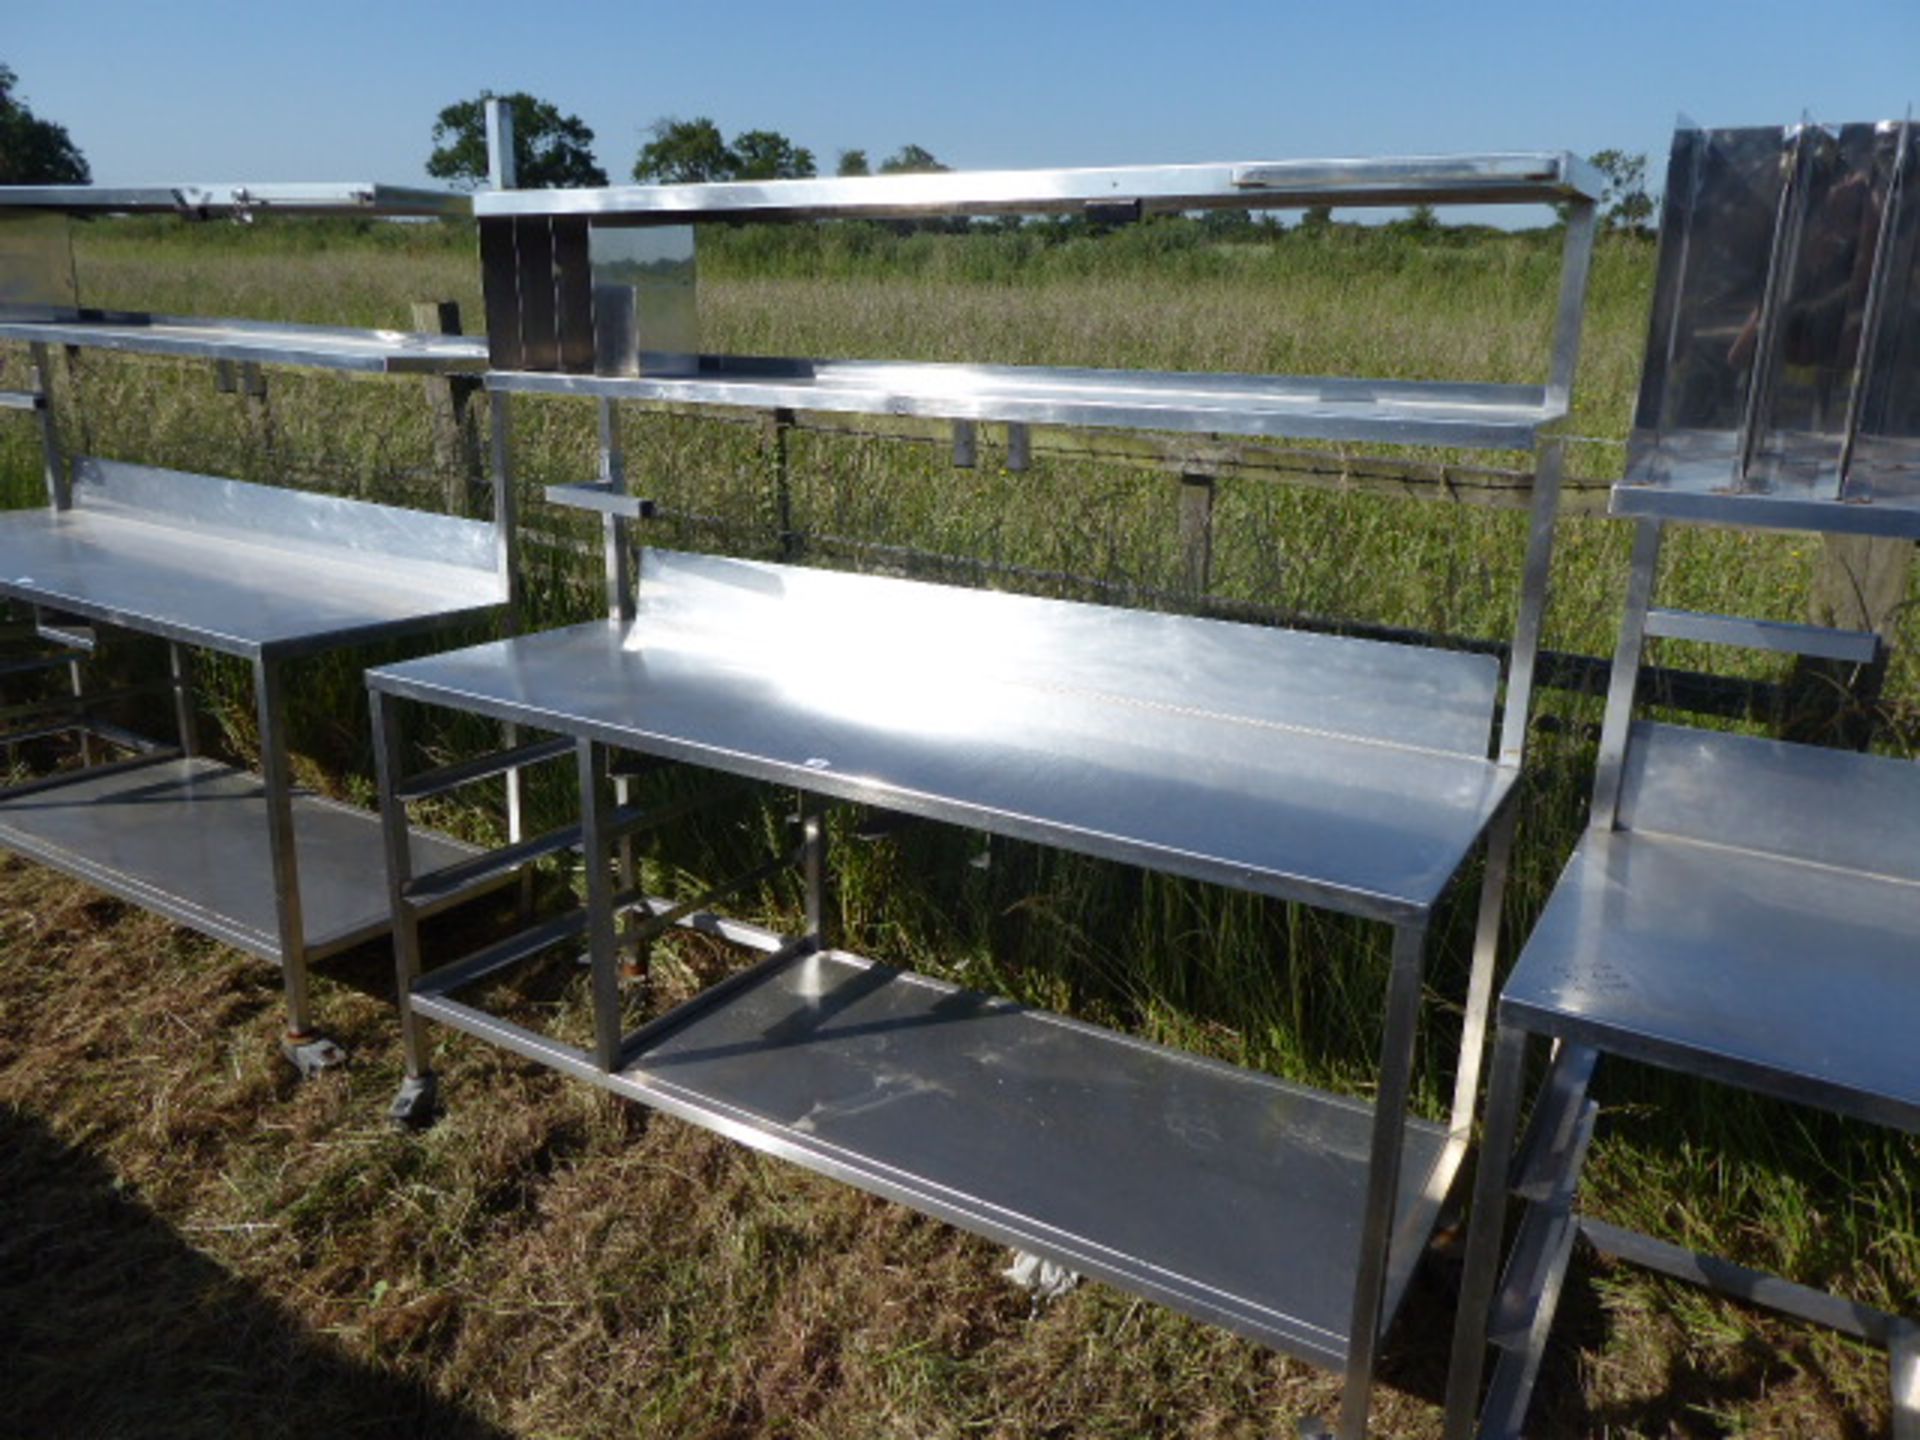 Stainless steel mobile food preparation station with 2 shelves over, shelf under space for trays,